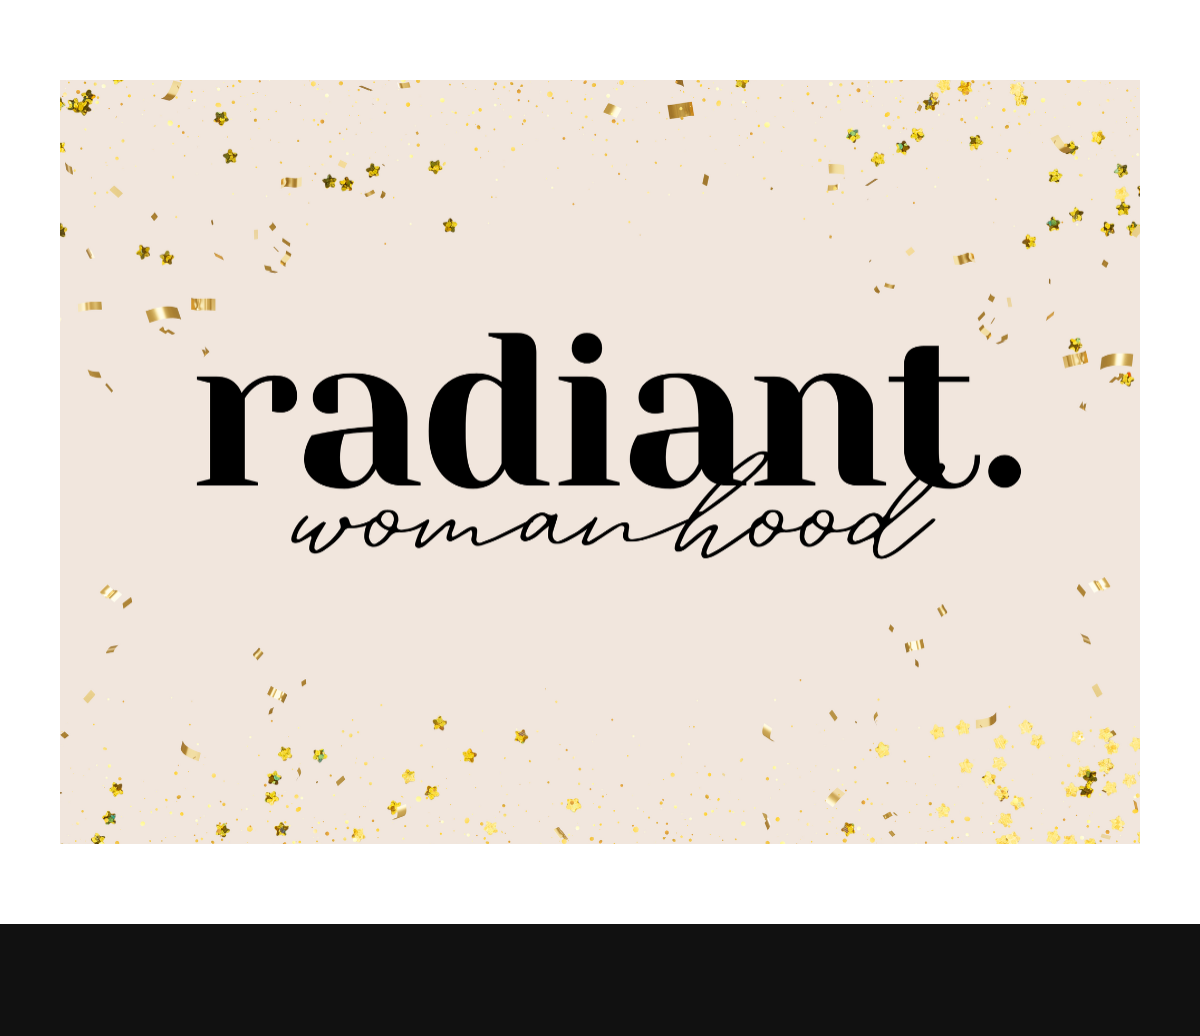 The Radiant Womanhood Podcast trailer is live!